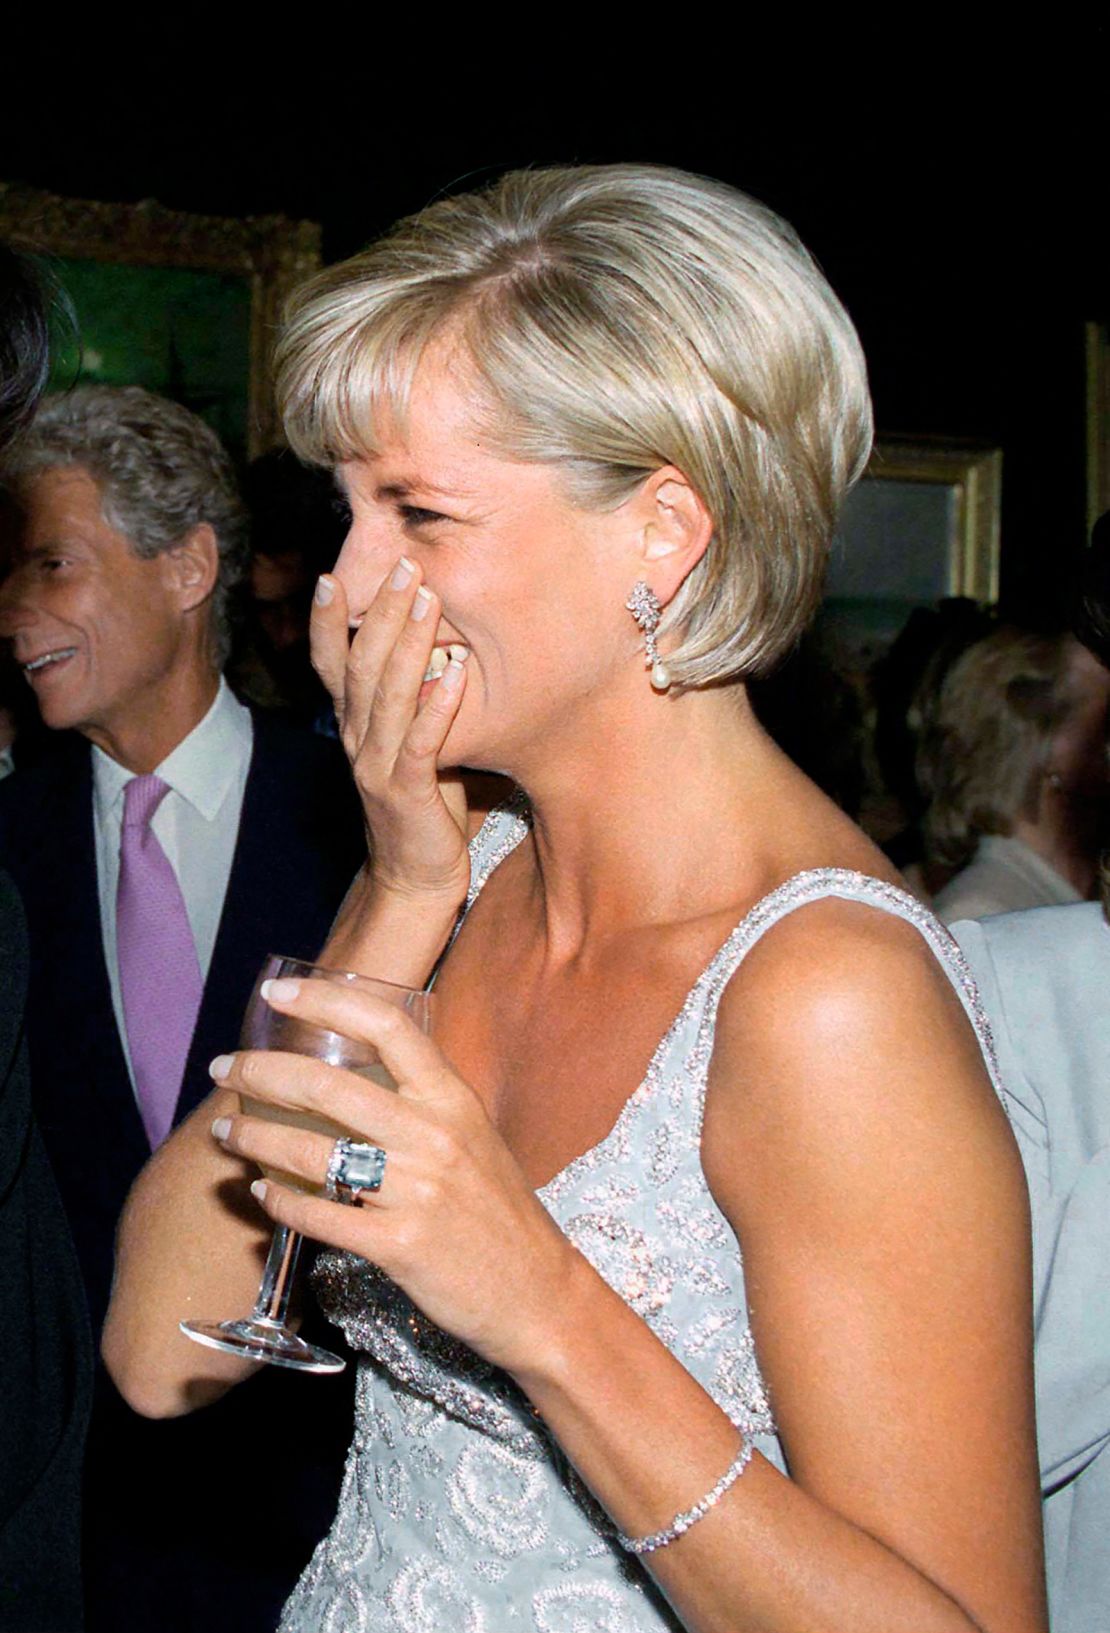 Diana, Princess Of Wales, seen wearing the bracelet at a Christie's party in 1997.